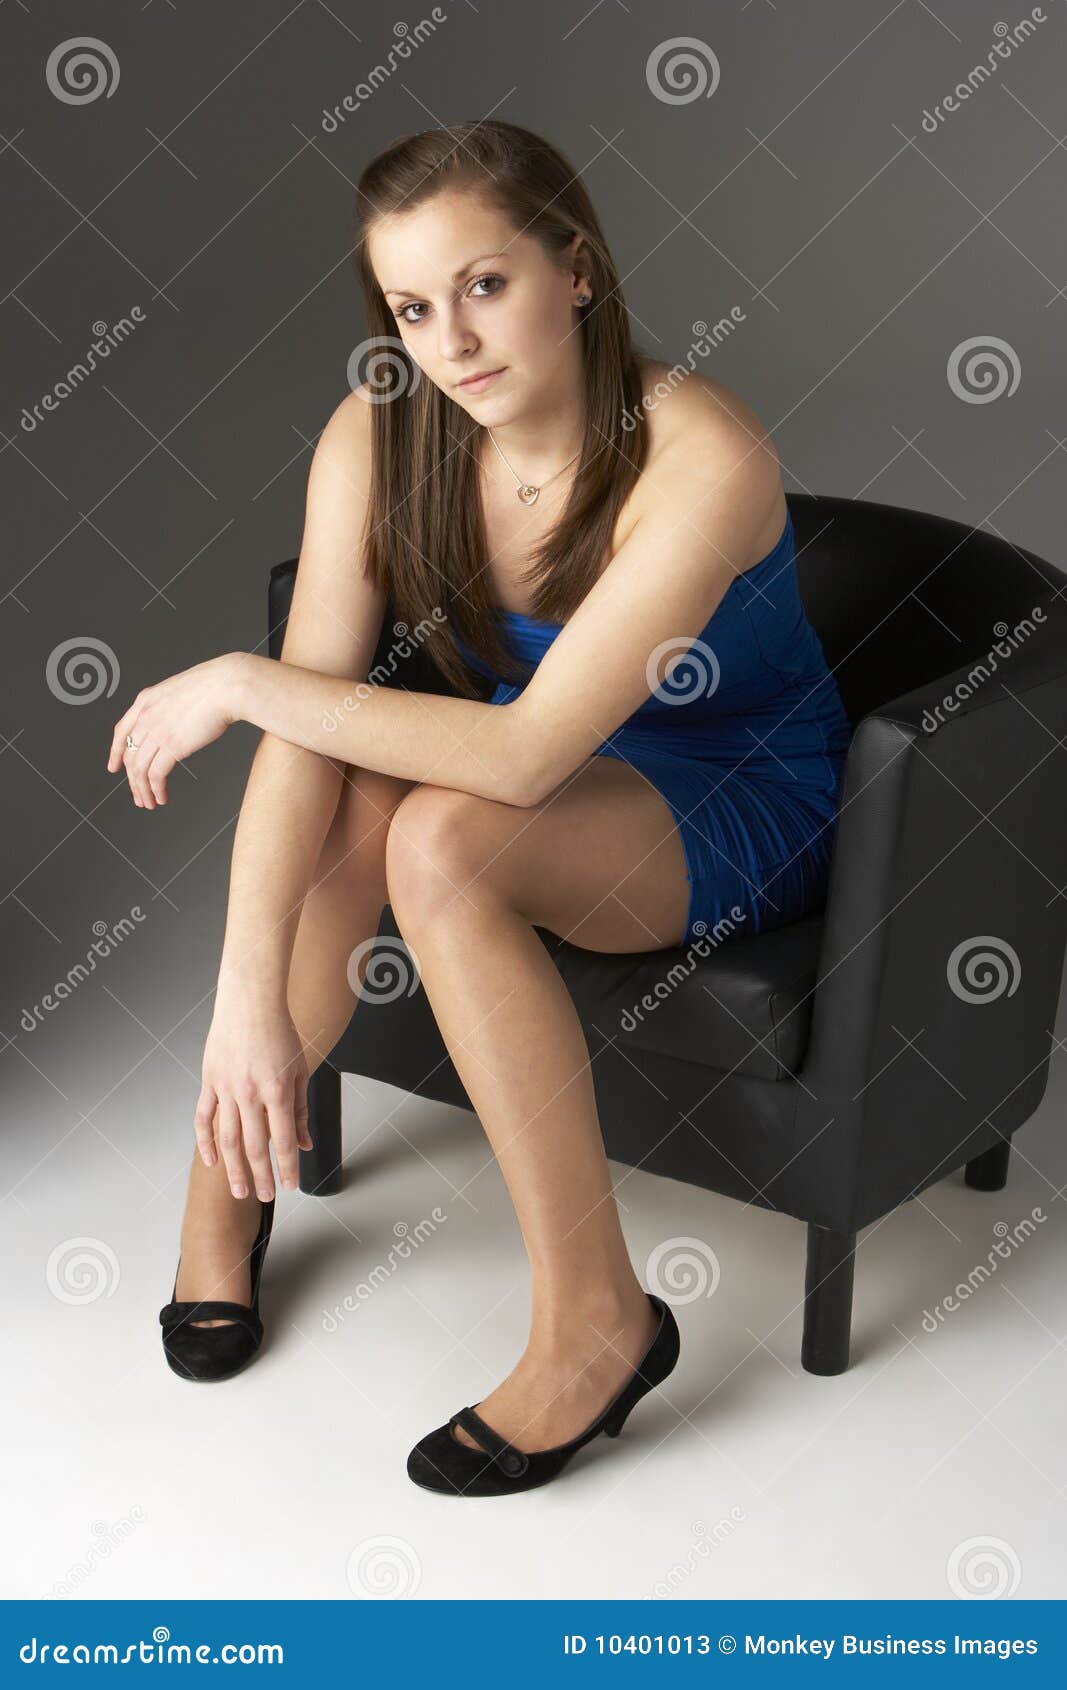 Sexy nude teen girl sitting on a chair